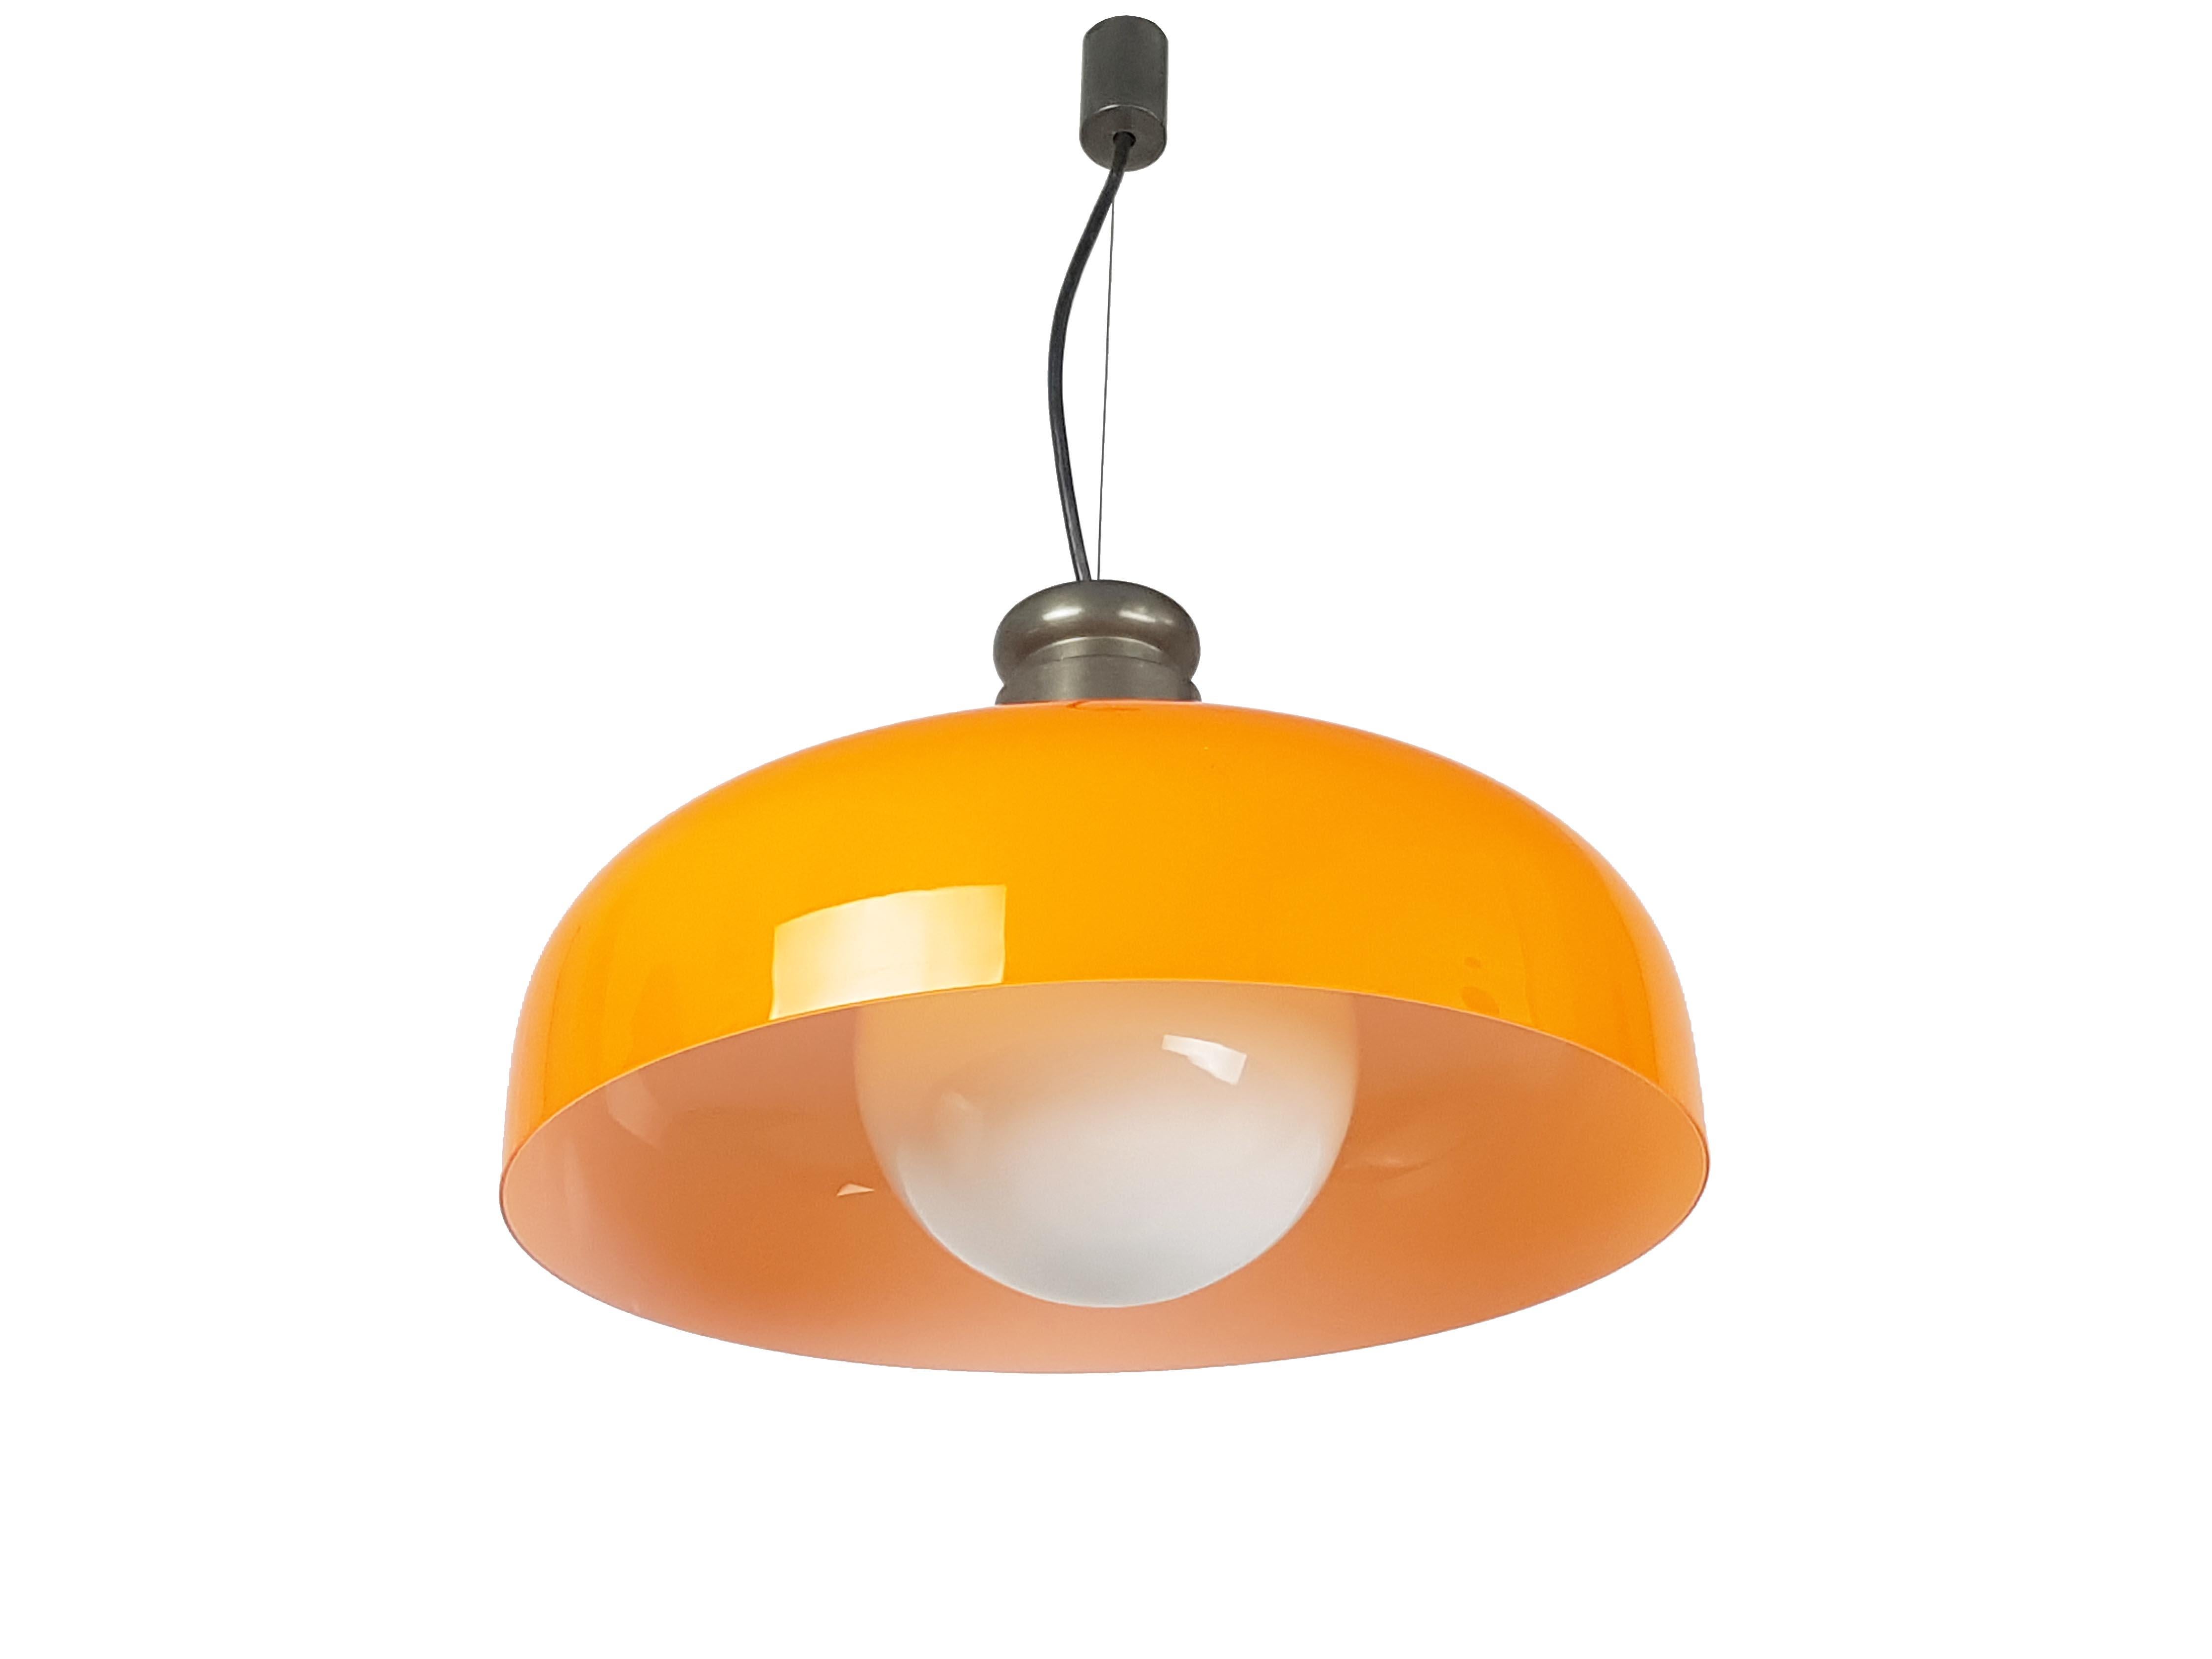 This elegant Murano glass pendant is made from a burnished brass structure and two handmade glass elements: An opaline spherical lamp shade and an “incamiciato” orange round shade.